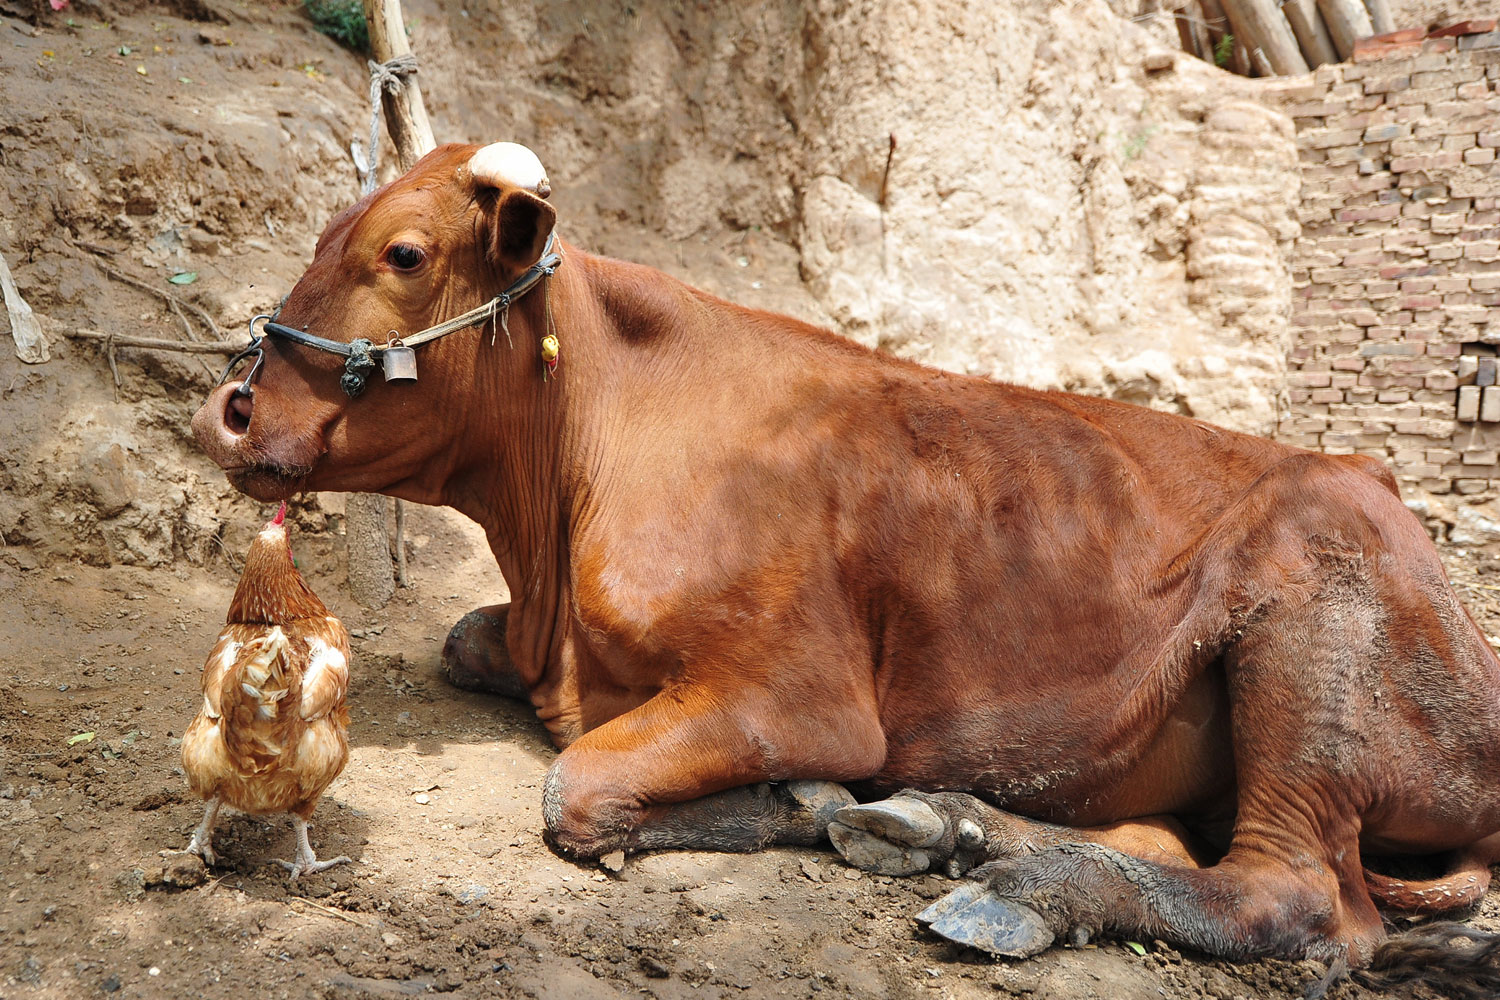 A hen is seen  kissing  an ox in a village in Taiyuan, Shanxi Province of China. The hen was pecking food from the ox's mouth.